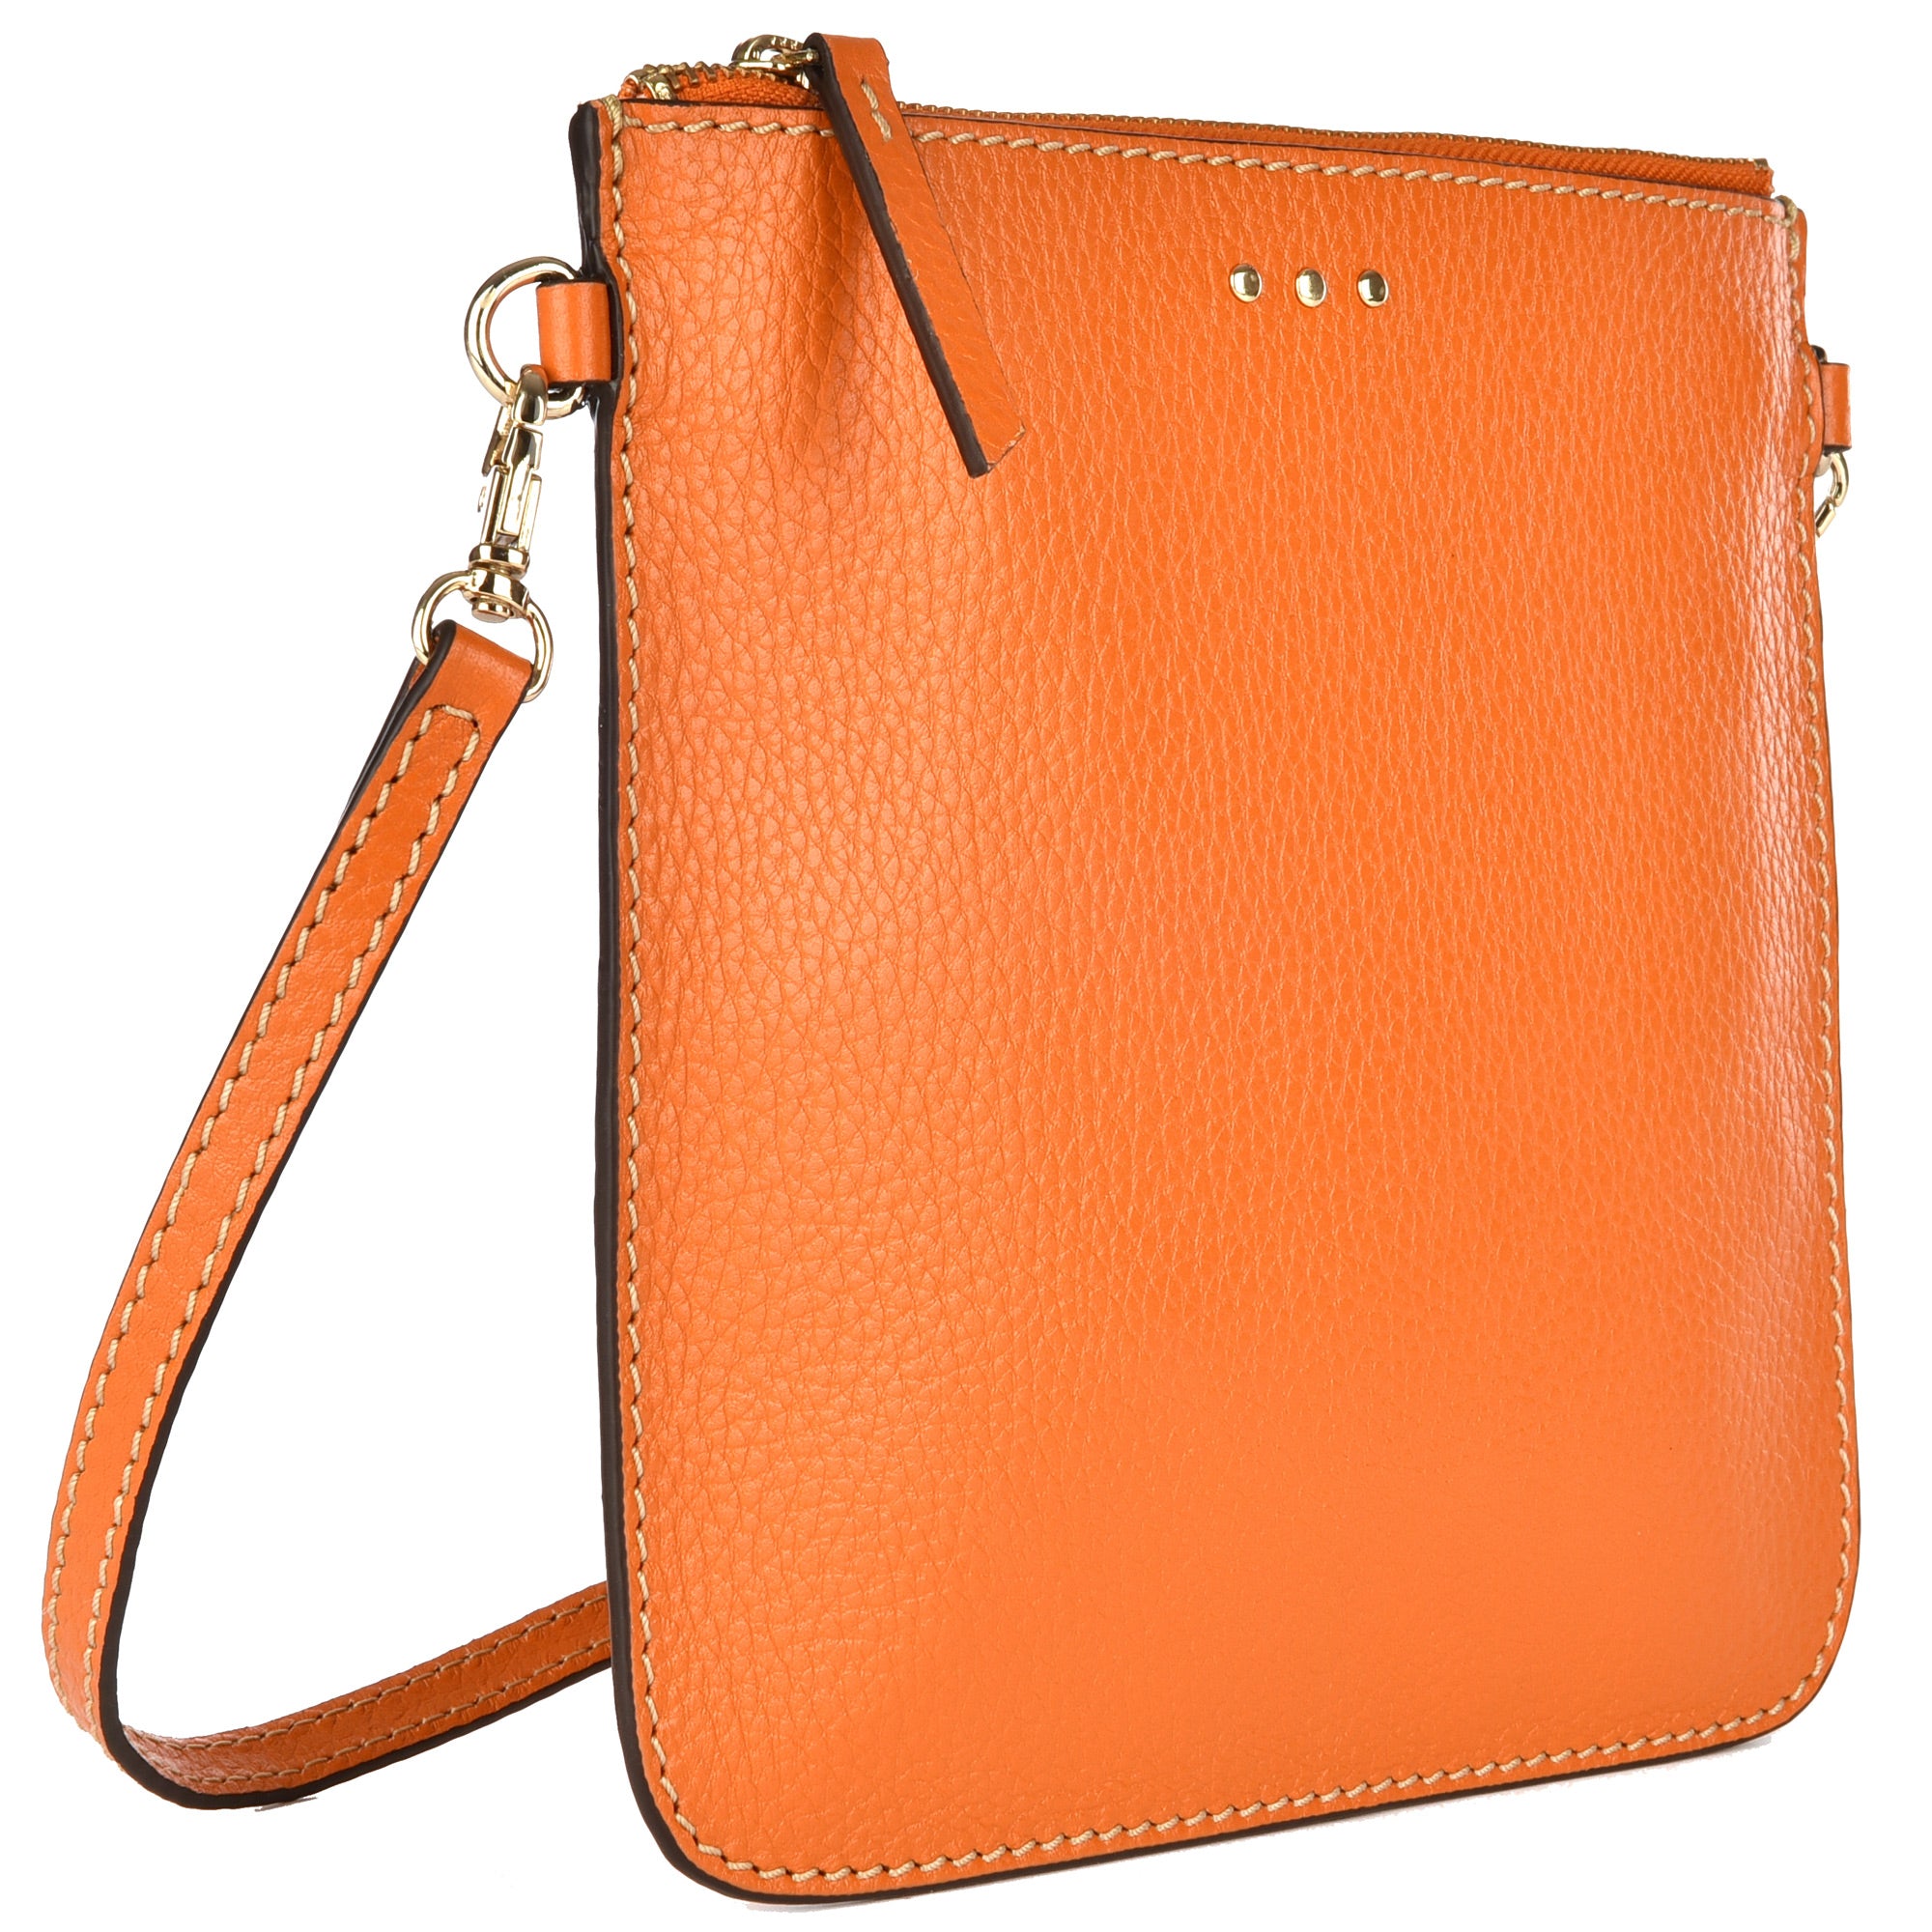 FLOPPY - Grained leather clutch bag